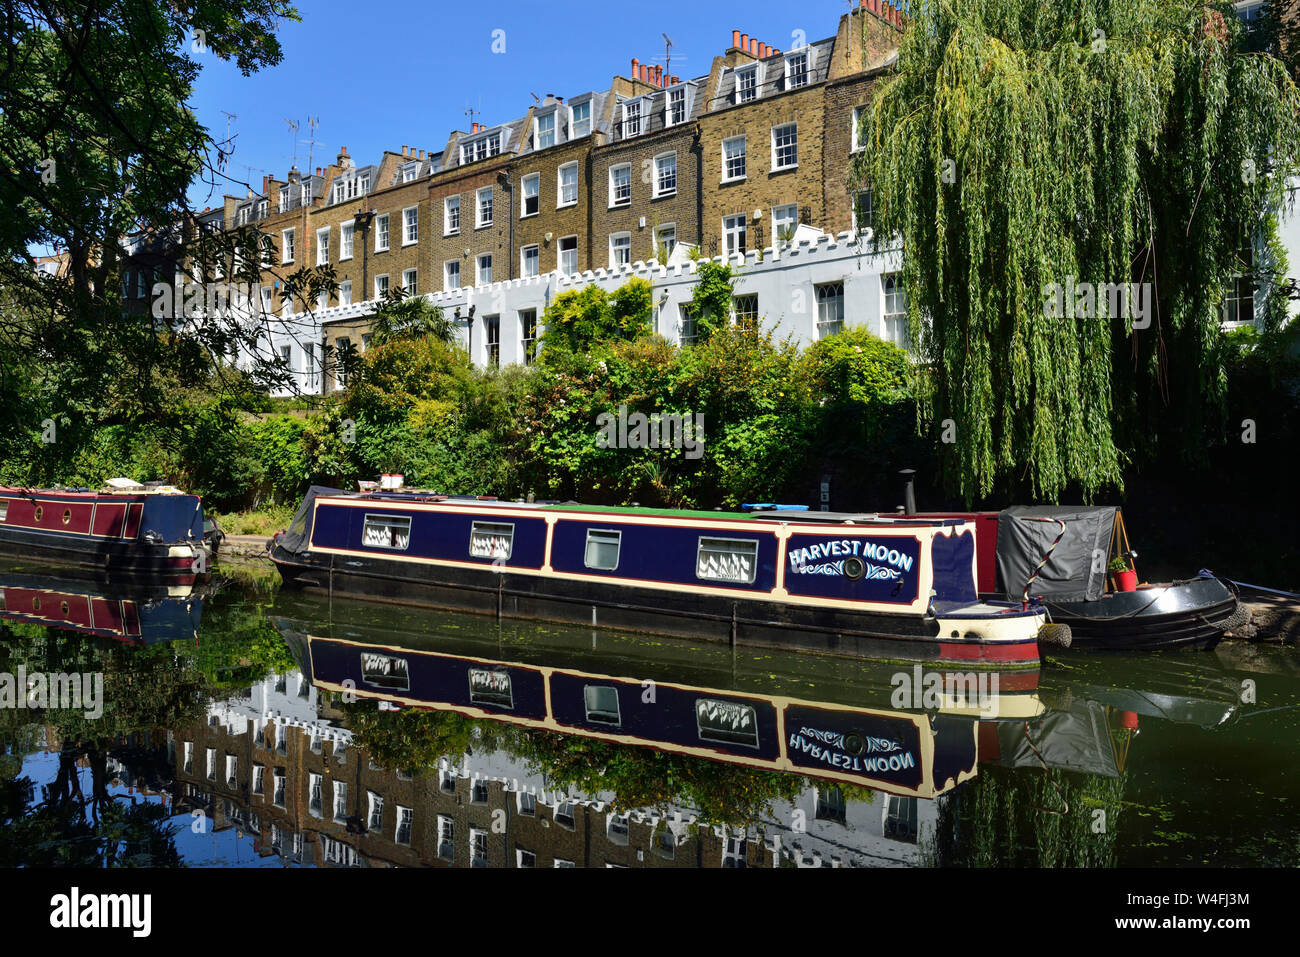 Moored Blue and cream barge, Regent's Canal, Colebrooke Row, Noel Road residential terraced houses, Islington, London, United Kingdom Stock Photo